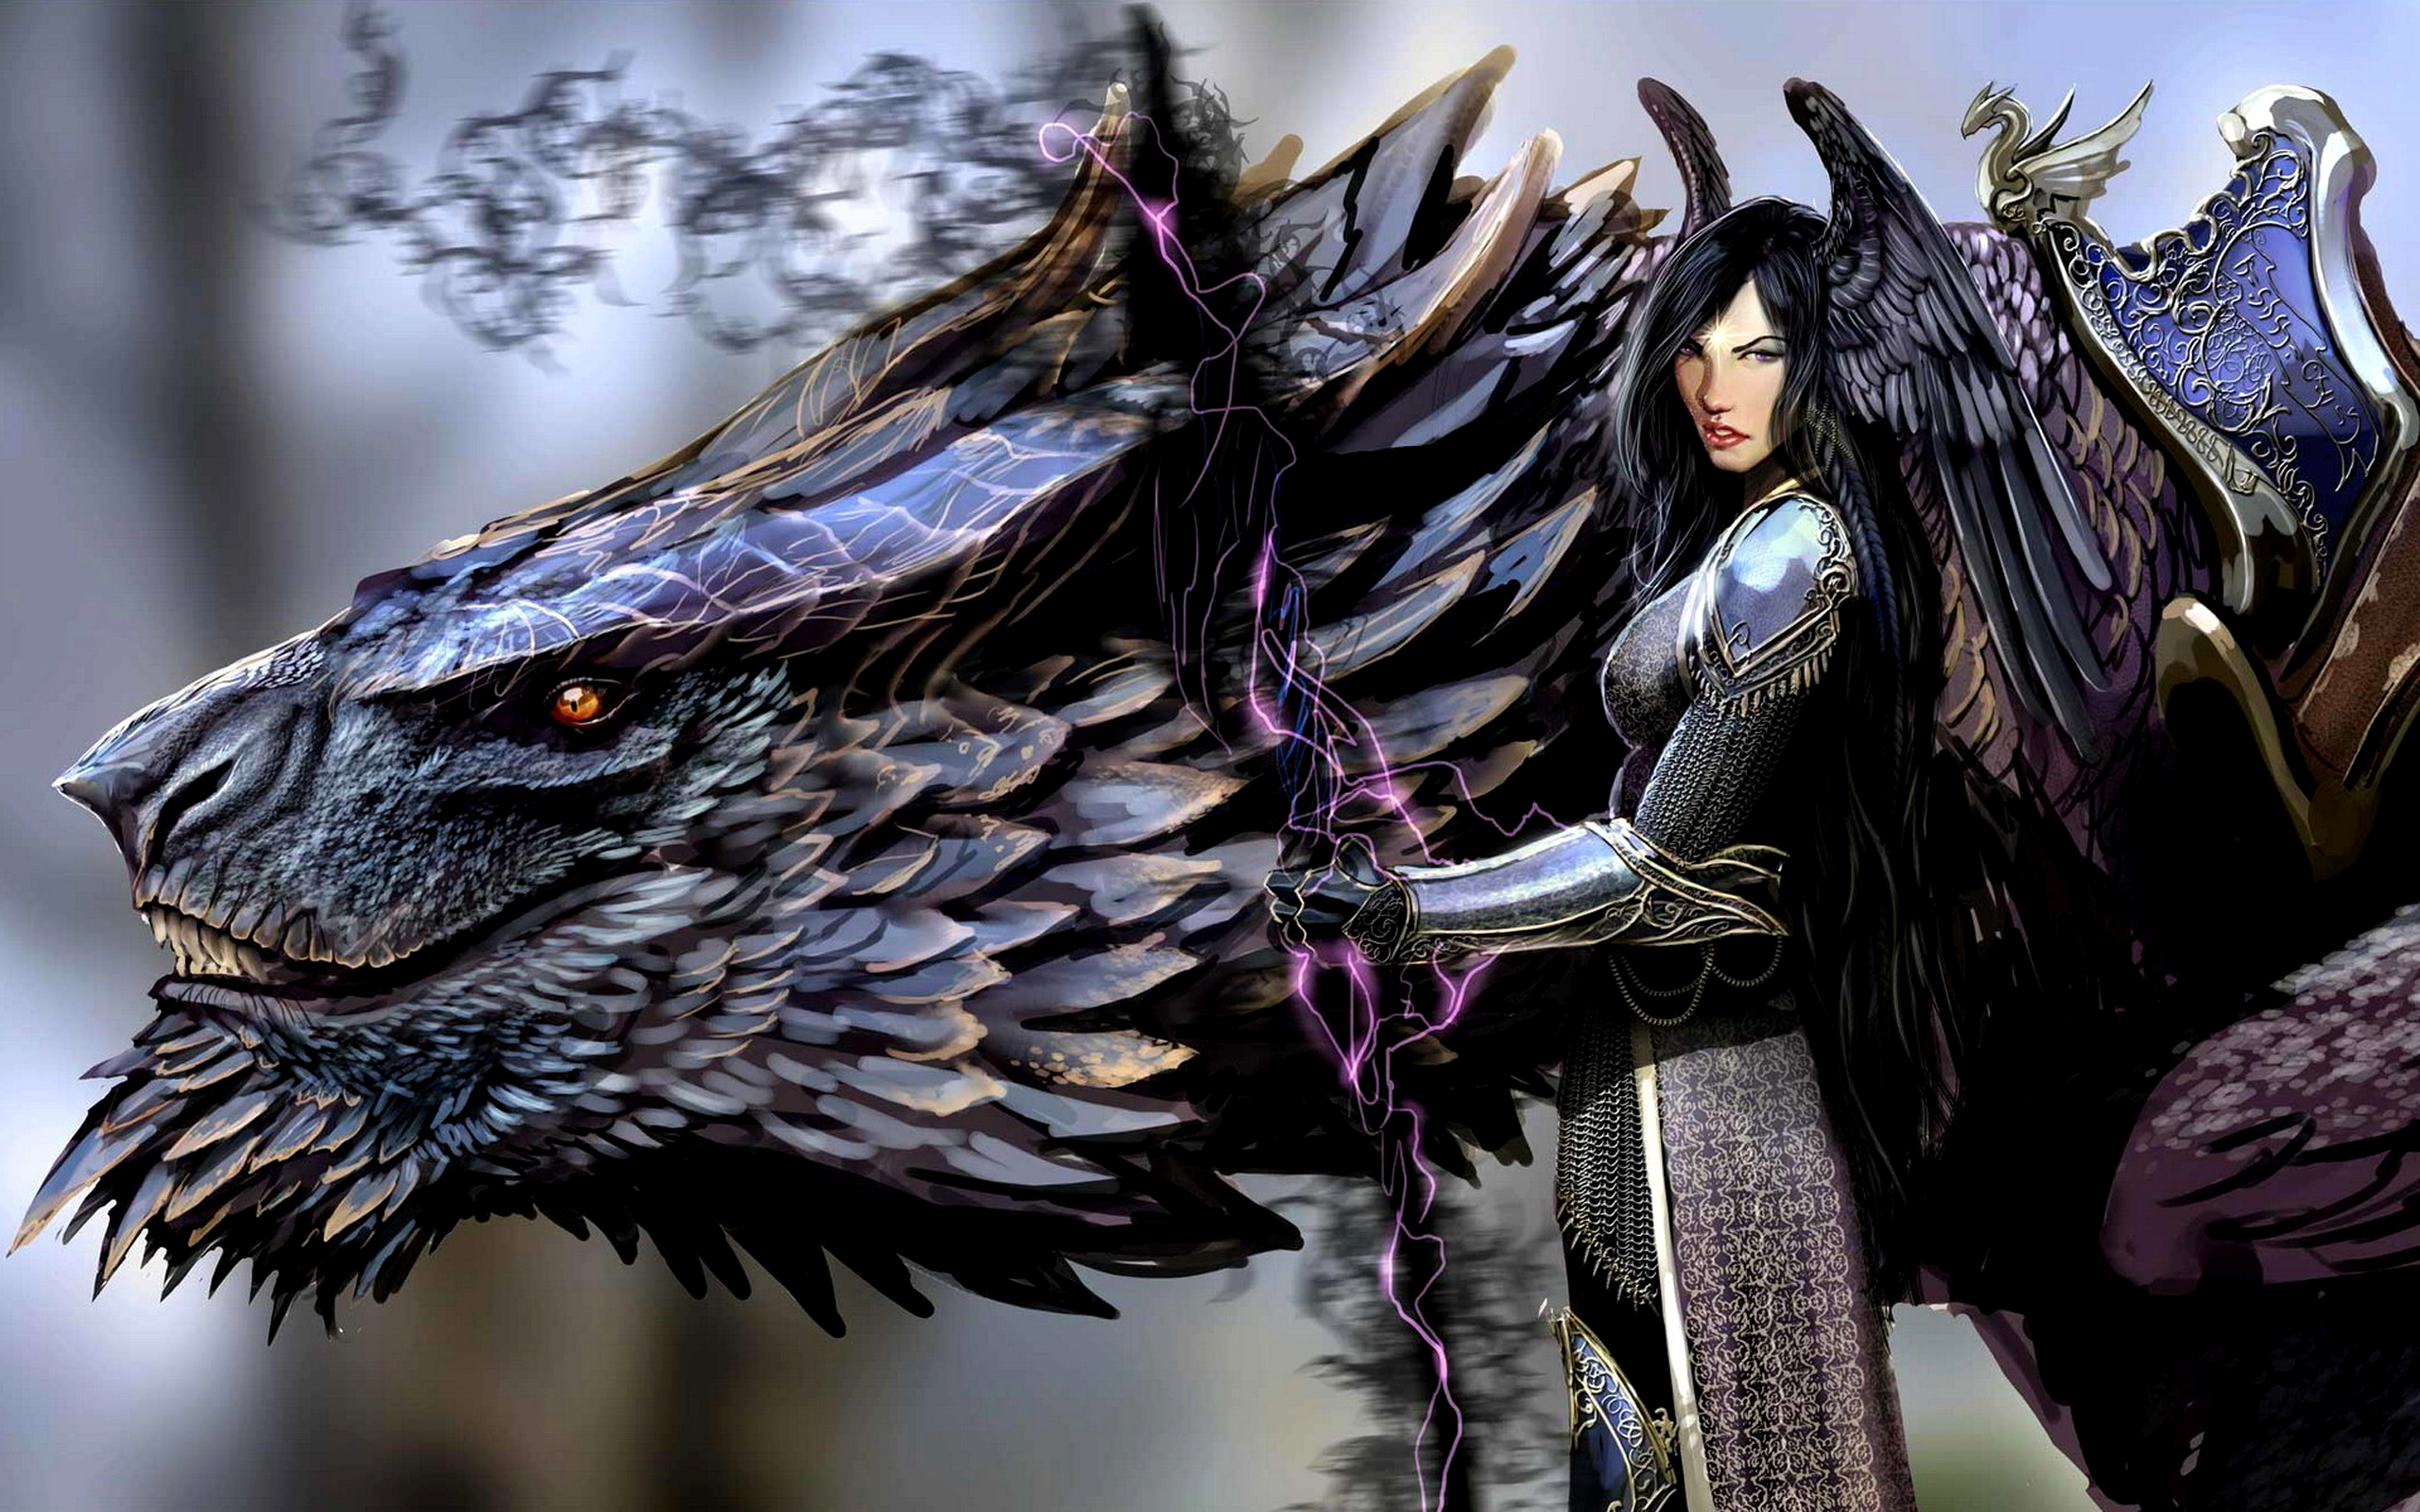 Champion of Freya: Stunning fantasy artwork featuring a magnificent dragon by Stjepan Sejic.